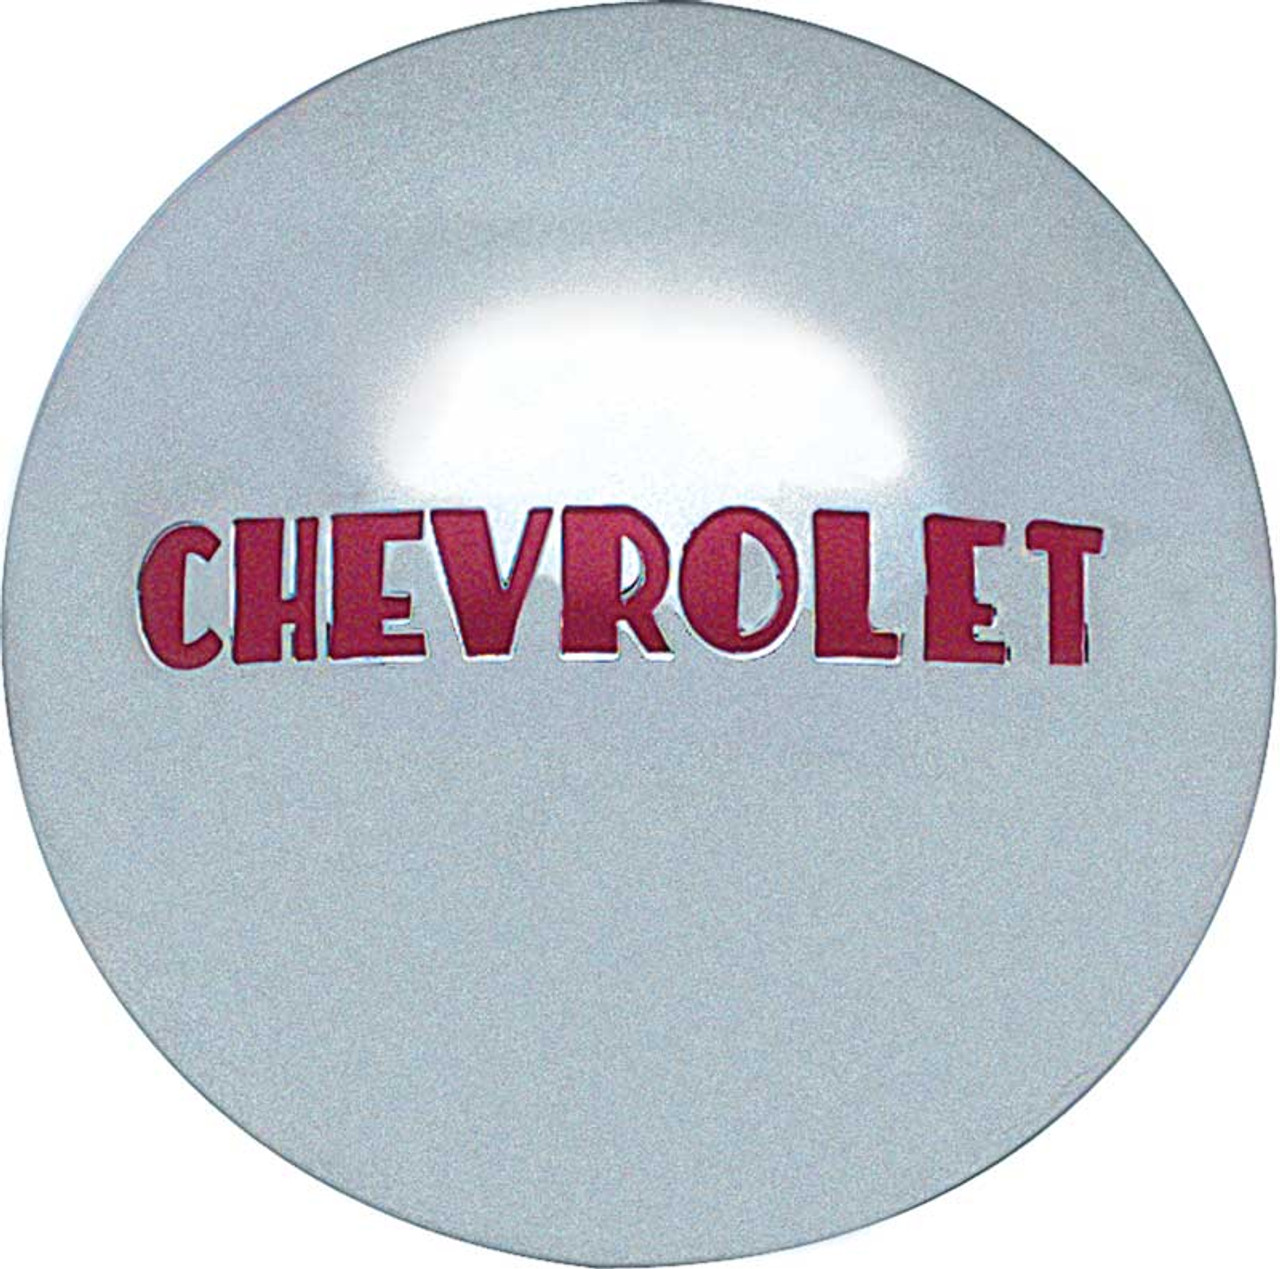 1947-1953 Chevy Truck Hub Cap Set "Chevrolet", Polished Stainless Steel Red Painted Details 1/2 Ton. Set of 4